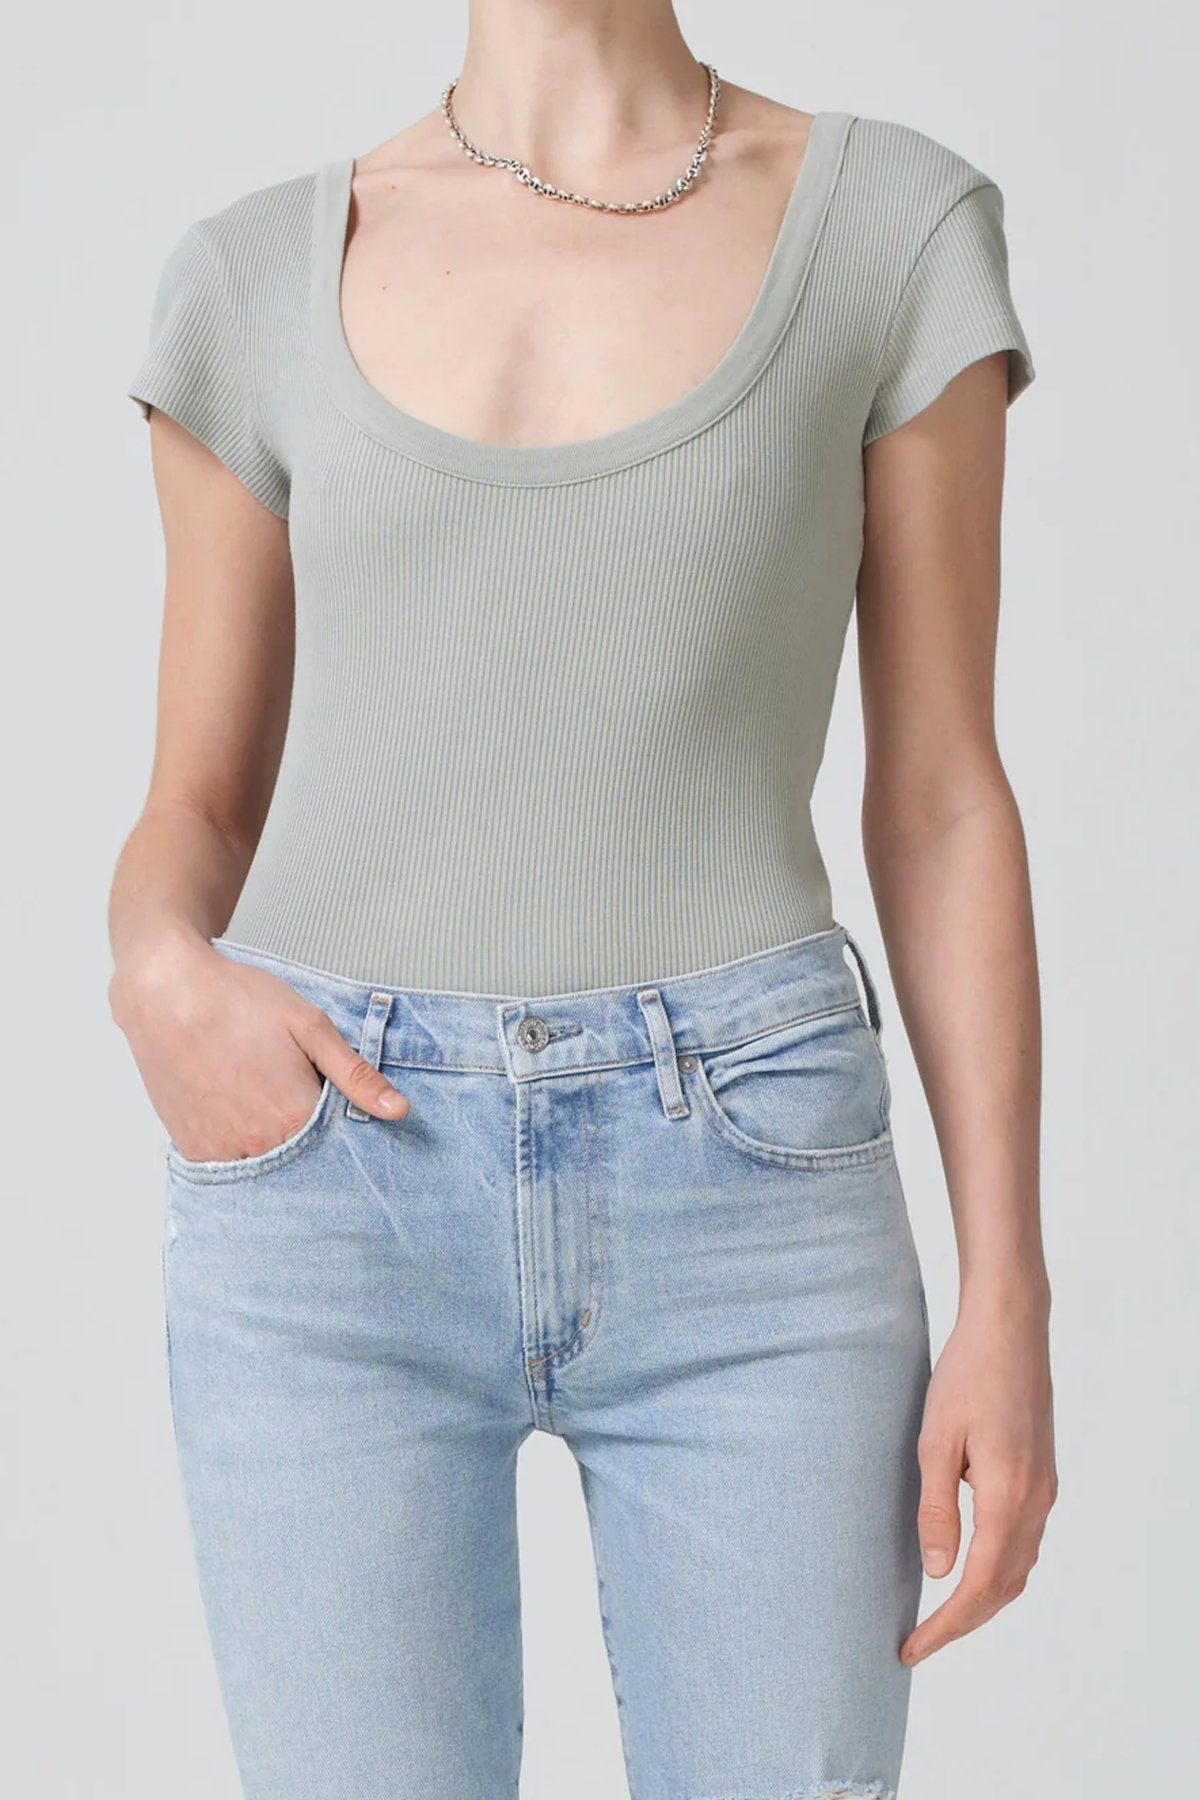 Lima Scoop Neck Tee in Andes - shop-olivia.com